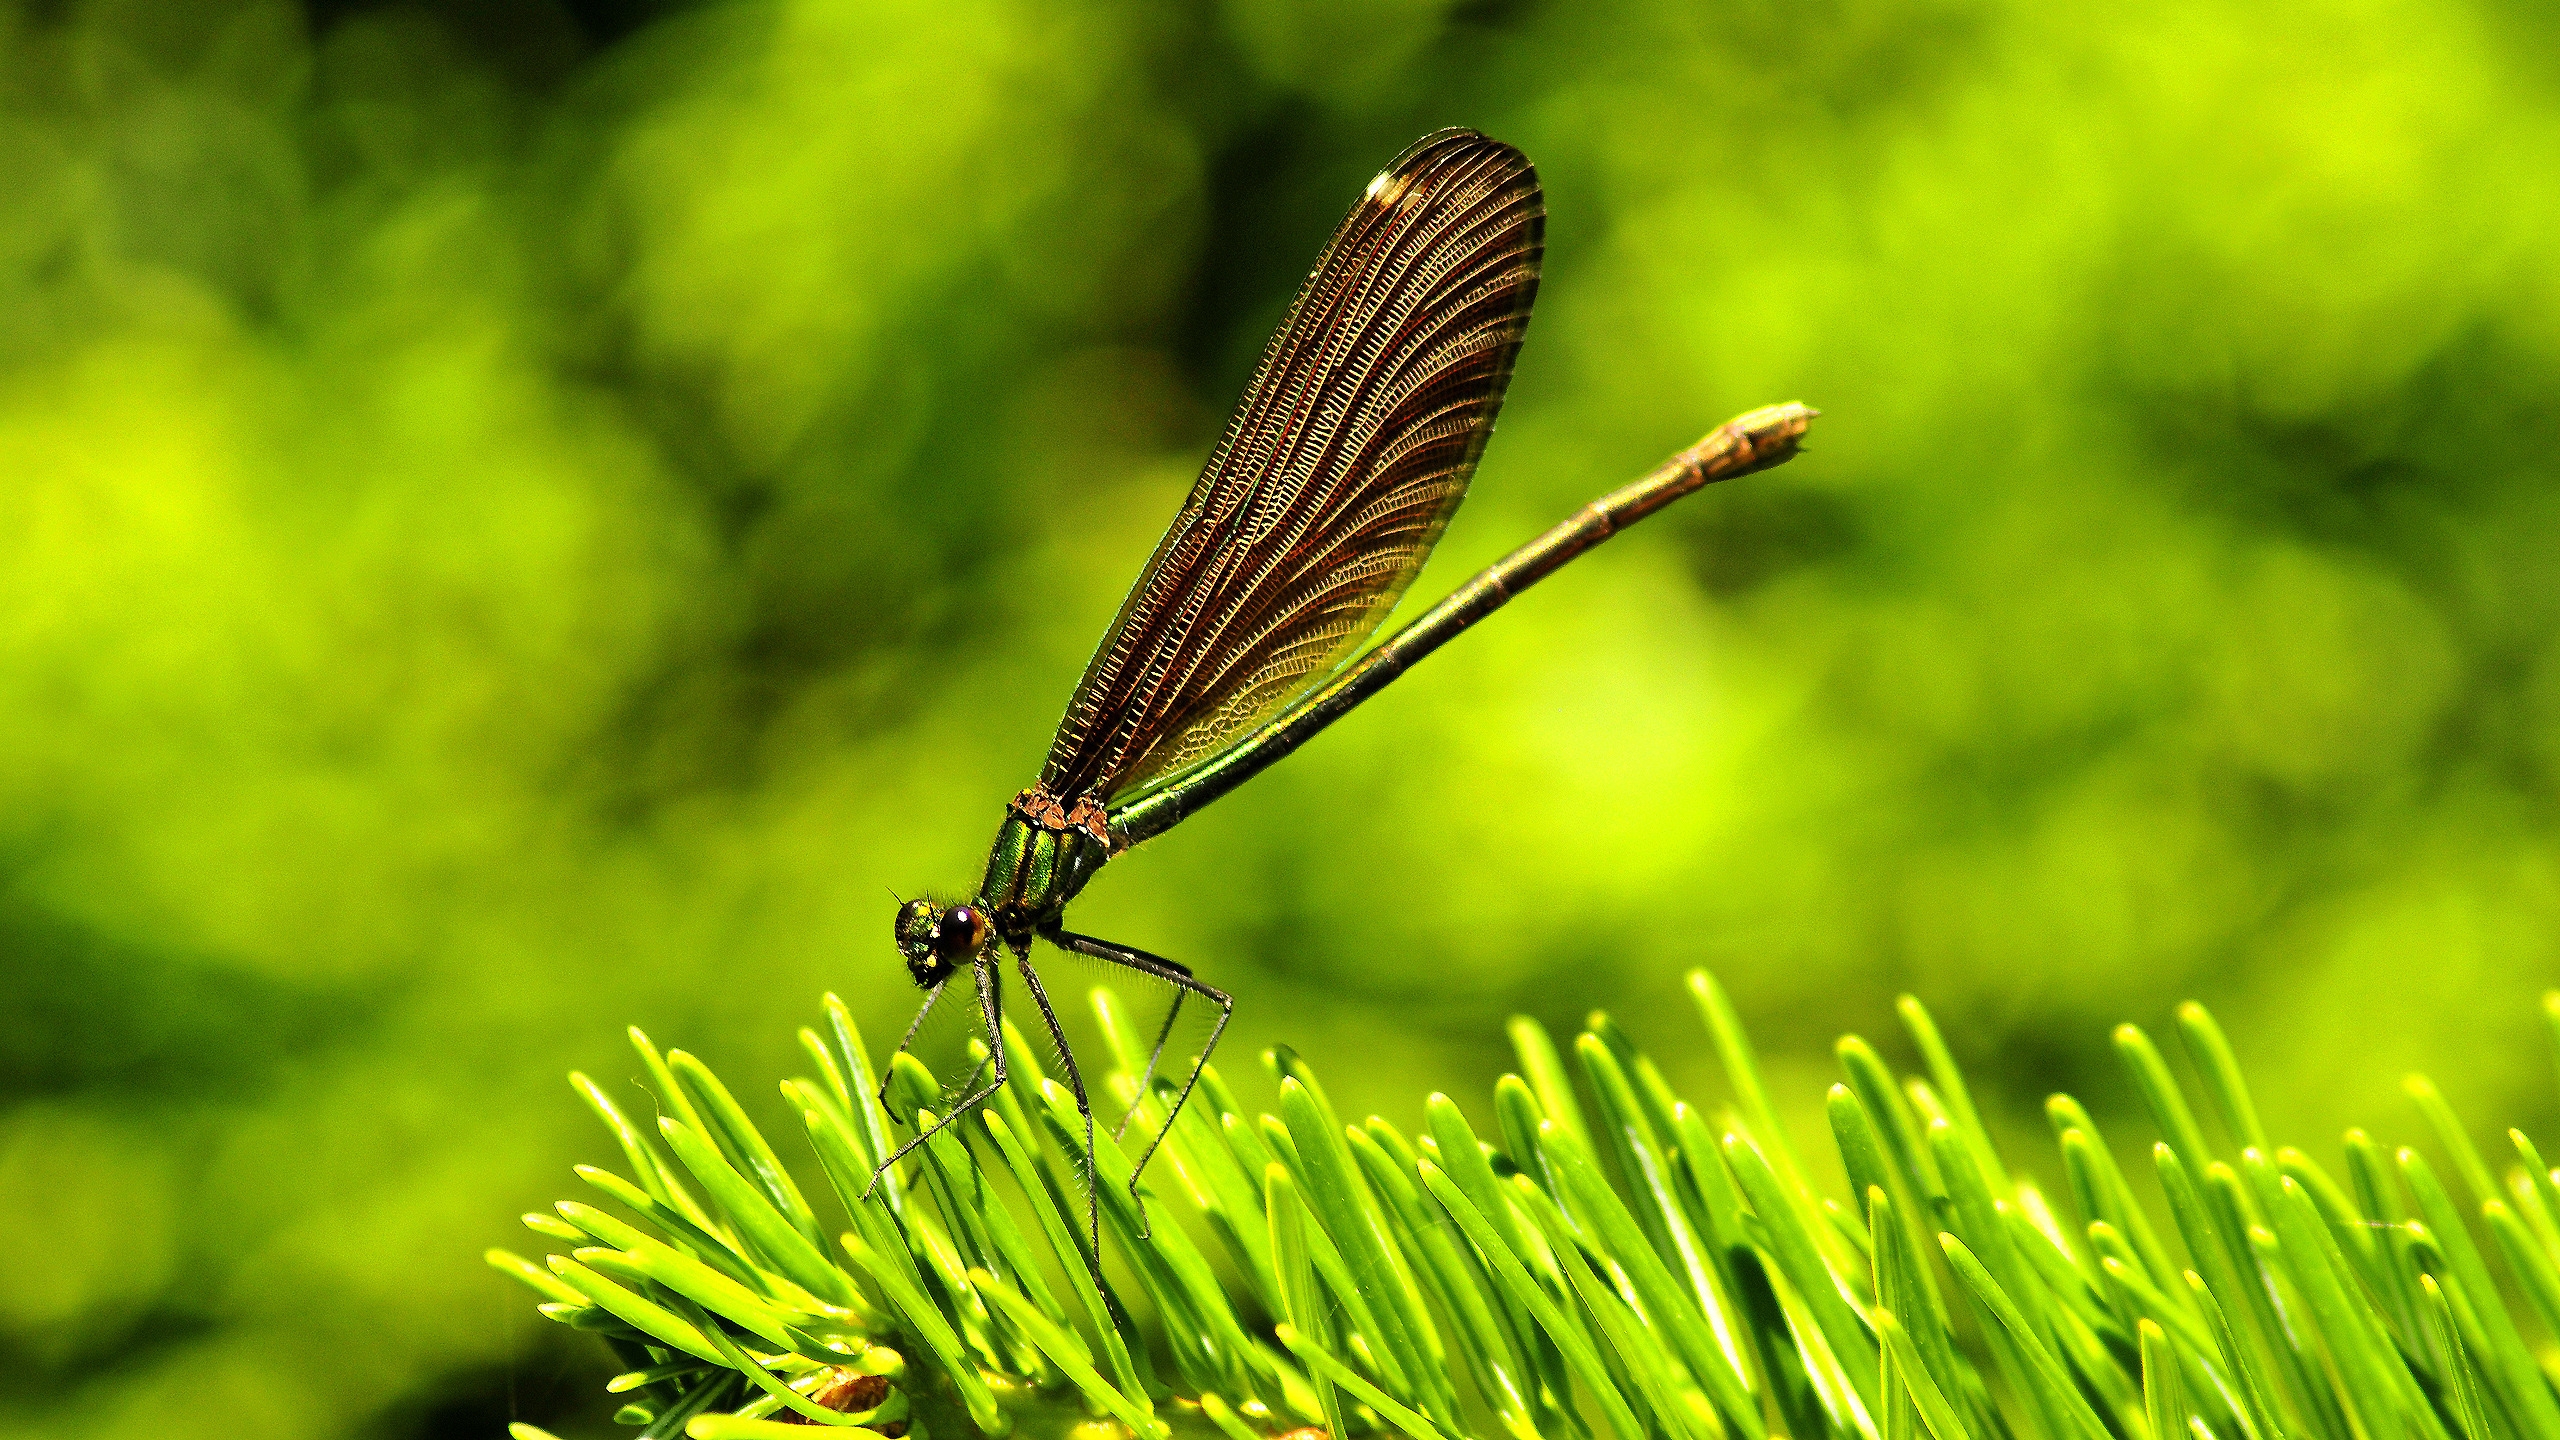 Amazing Dragon Fly for 2560x1440 HDTV resolution